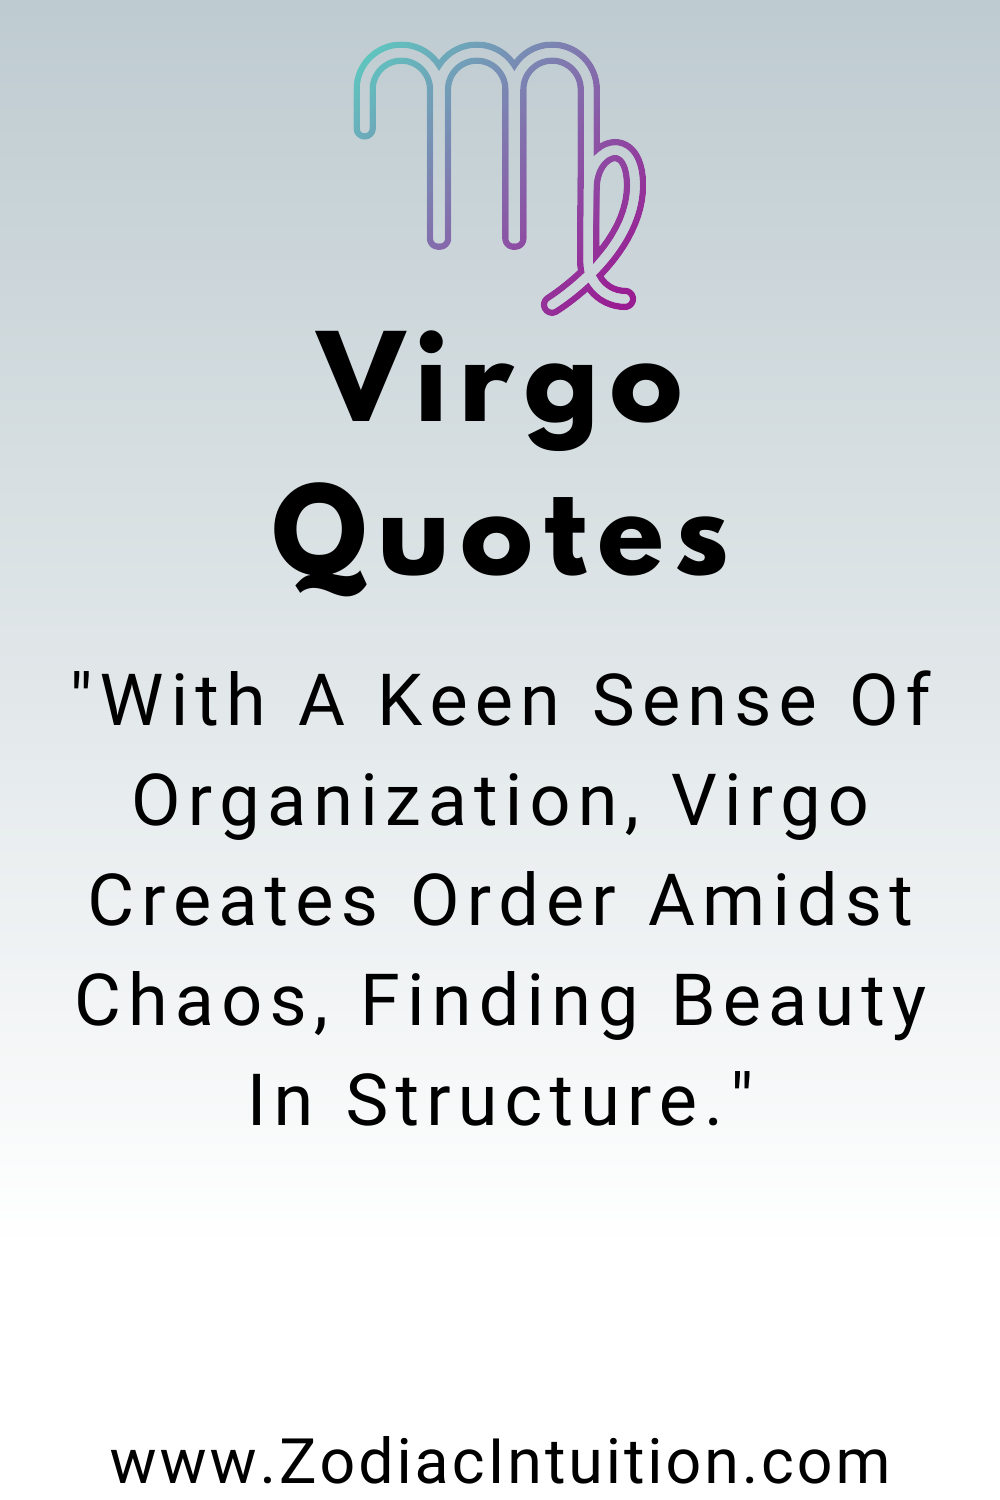 Top 5 Virgo Quotes And Inspiration